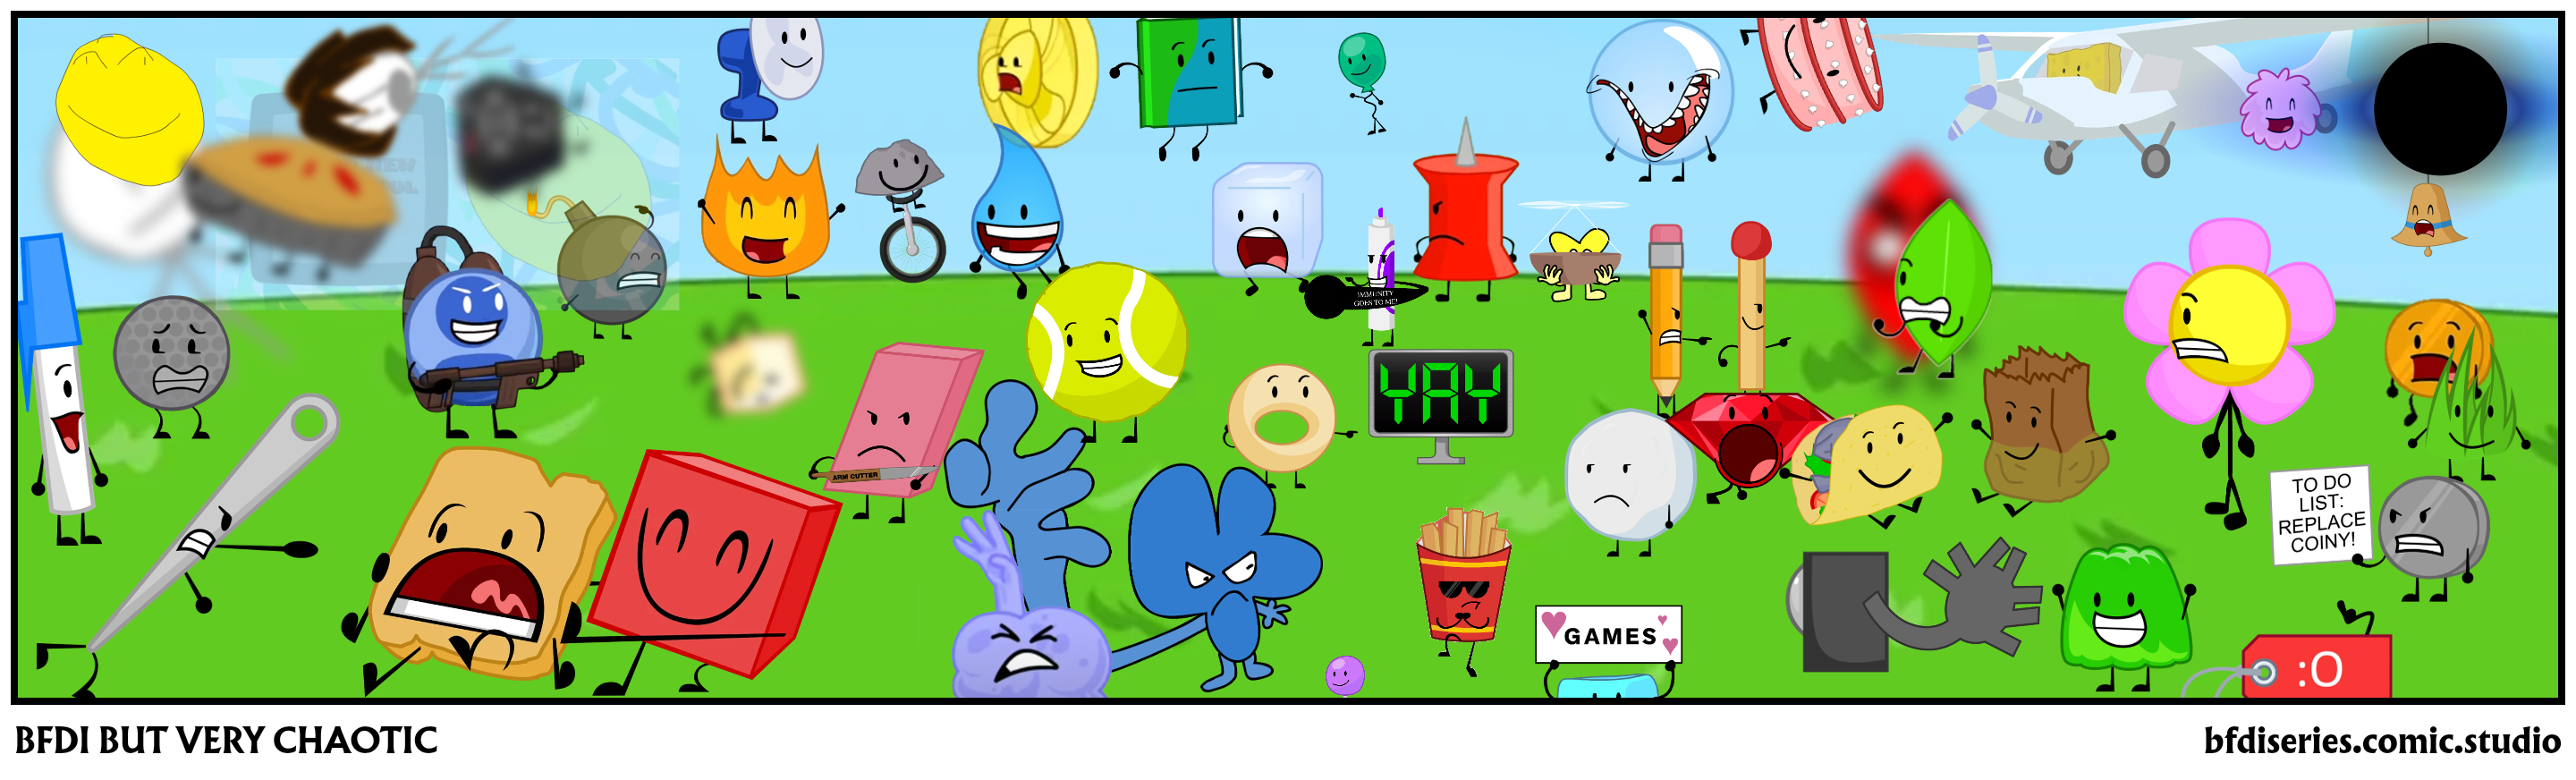 BFDI BUT VERY CHAOTIC